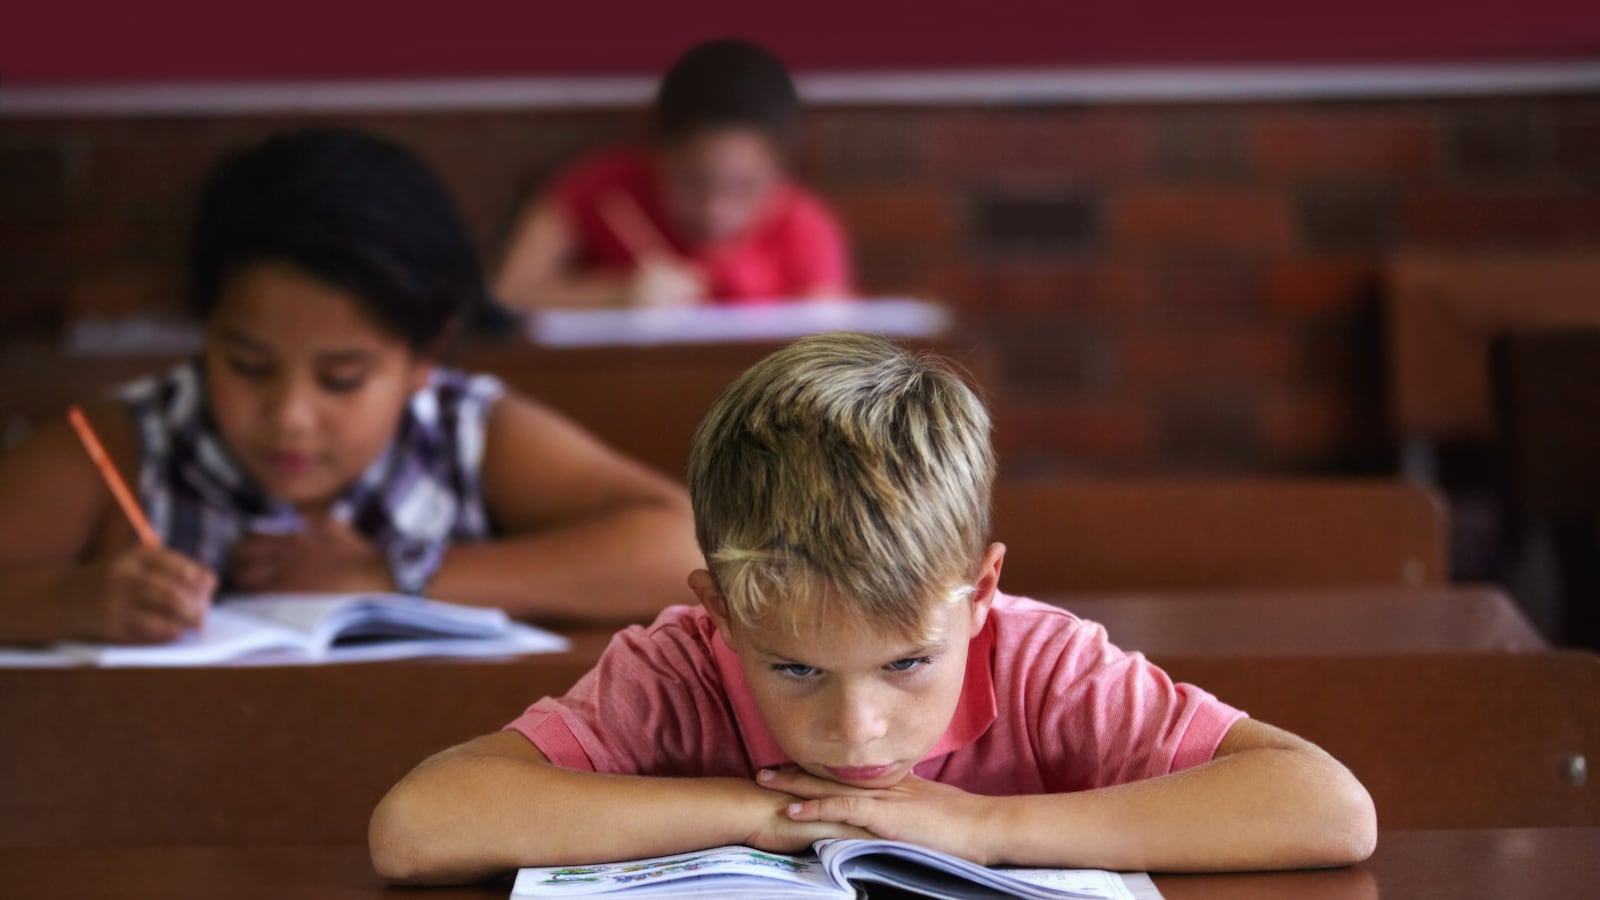 A young boy resting his head on his arms as he sits in a classroom looking bored (Getty Images)